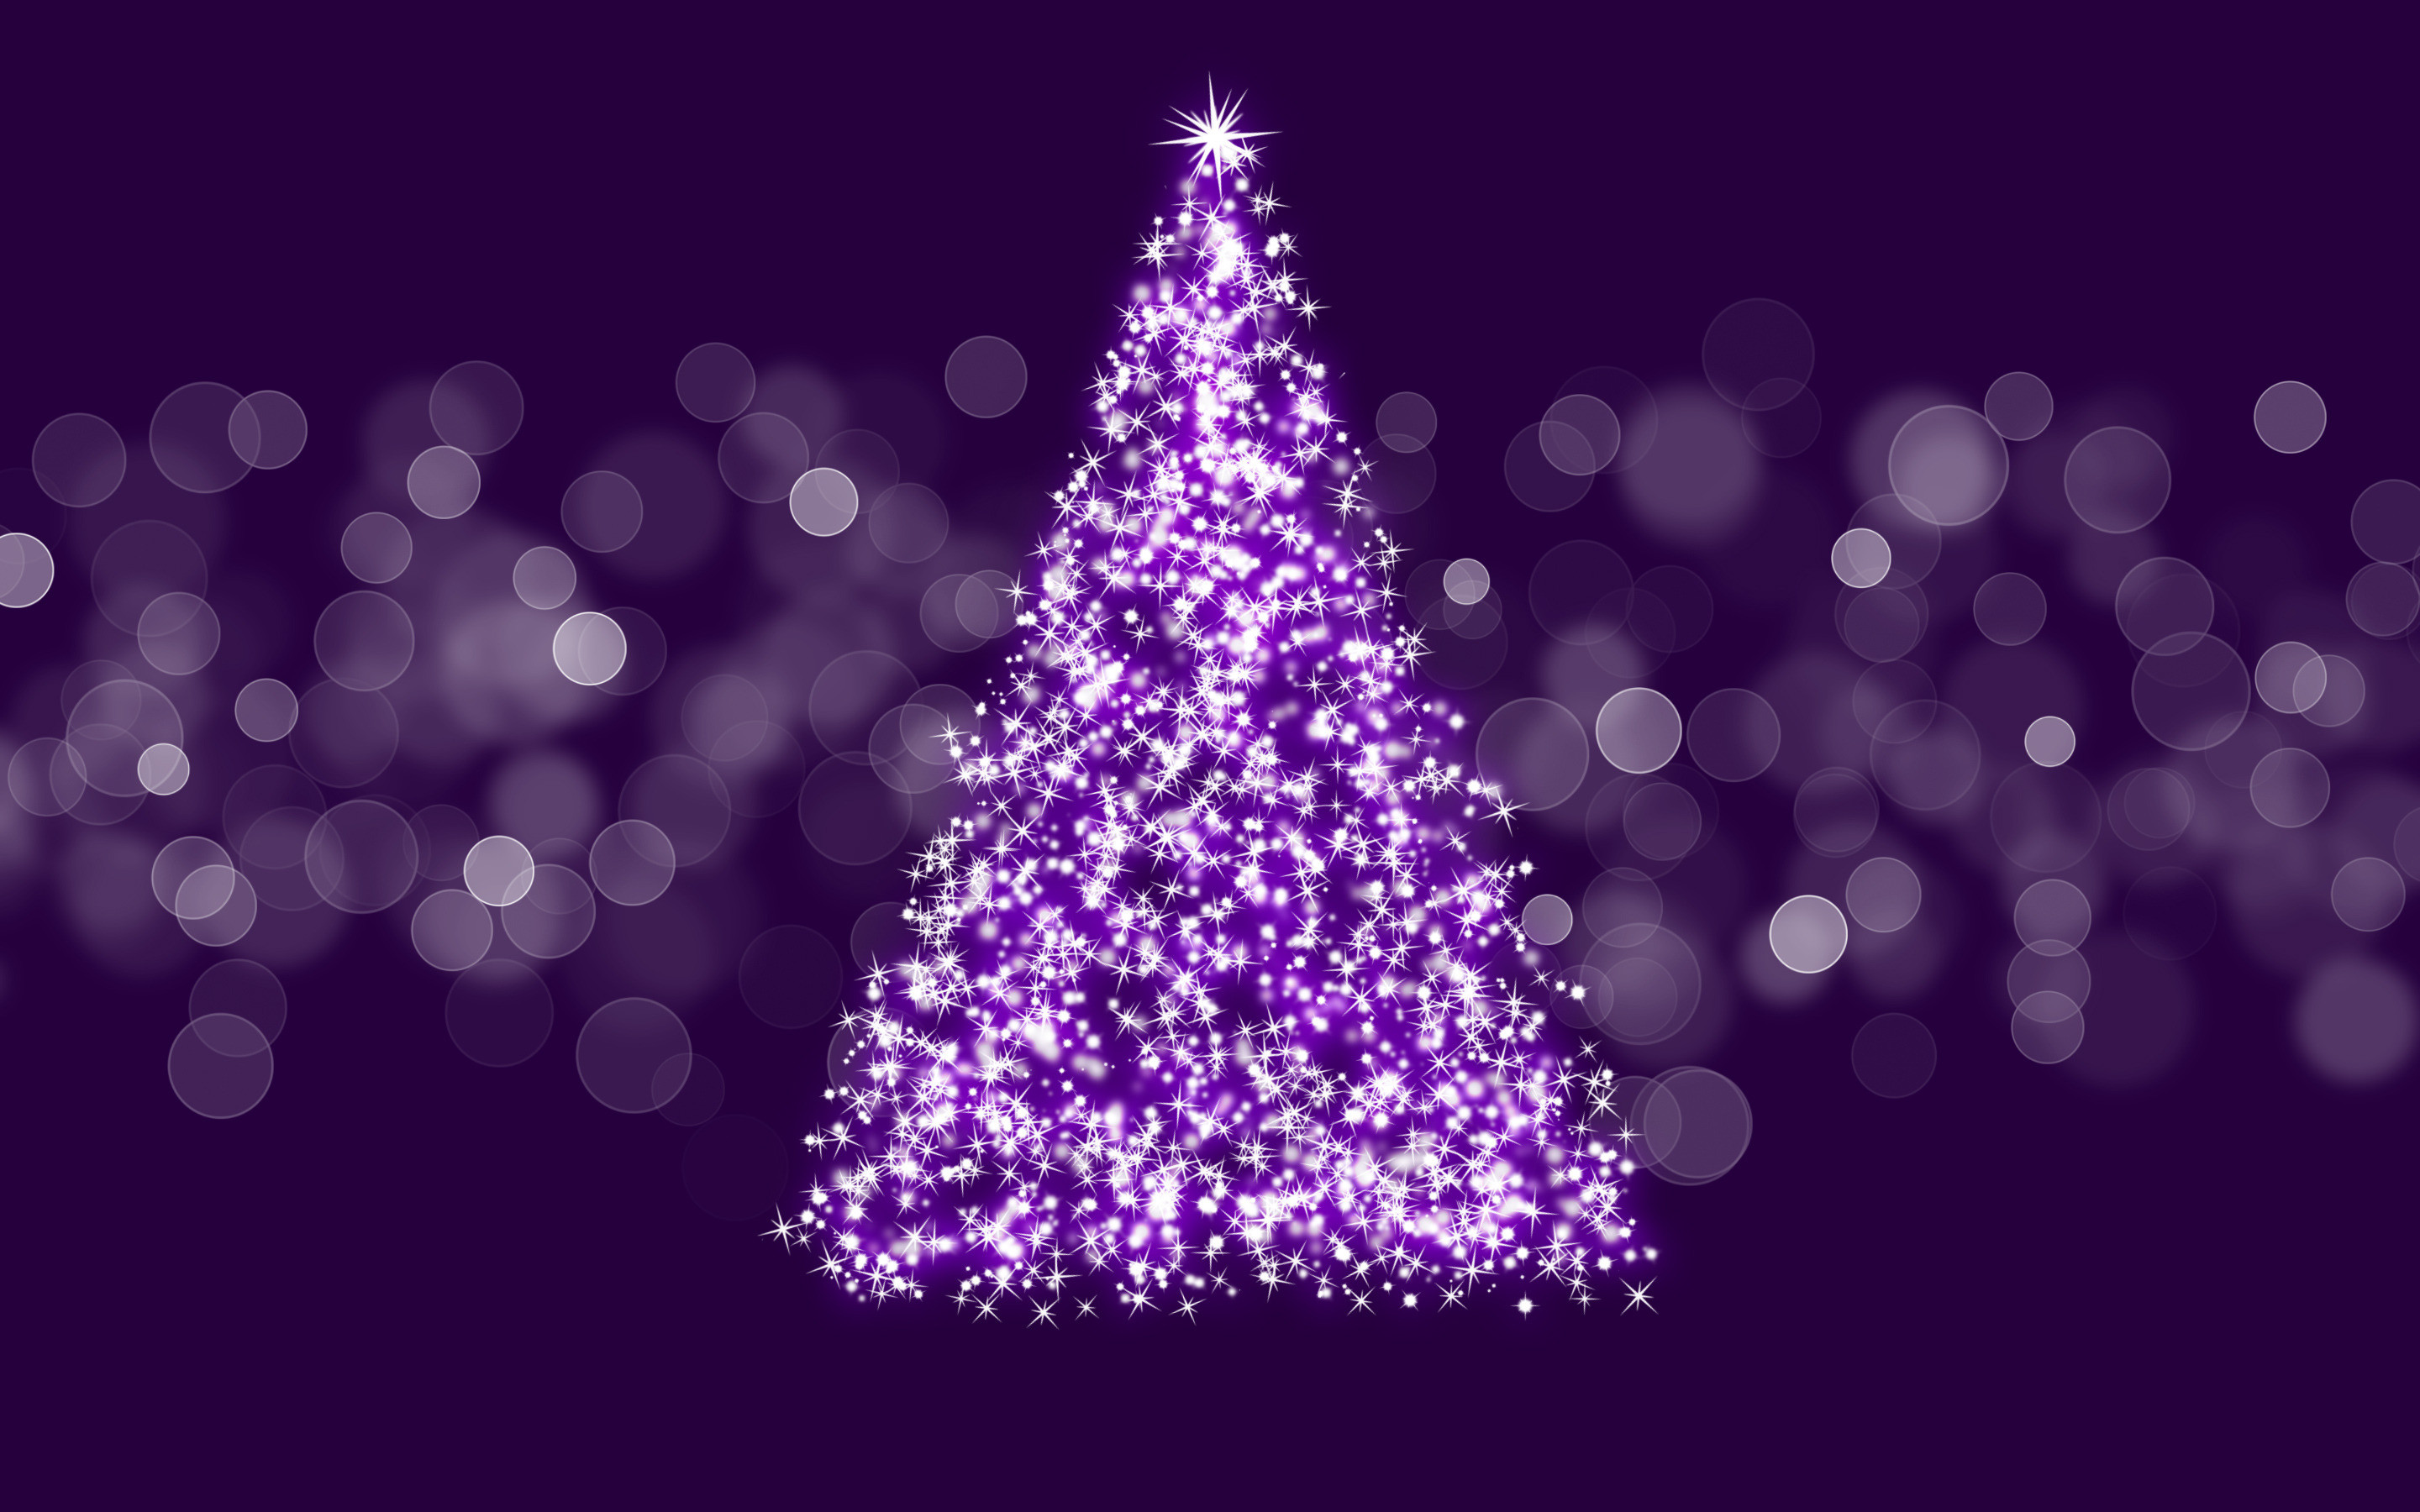 Christmas Tree Wallpapers For Wallpaper Images About Trees Toppers Tables On Pinterest Purple And Silver Deco